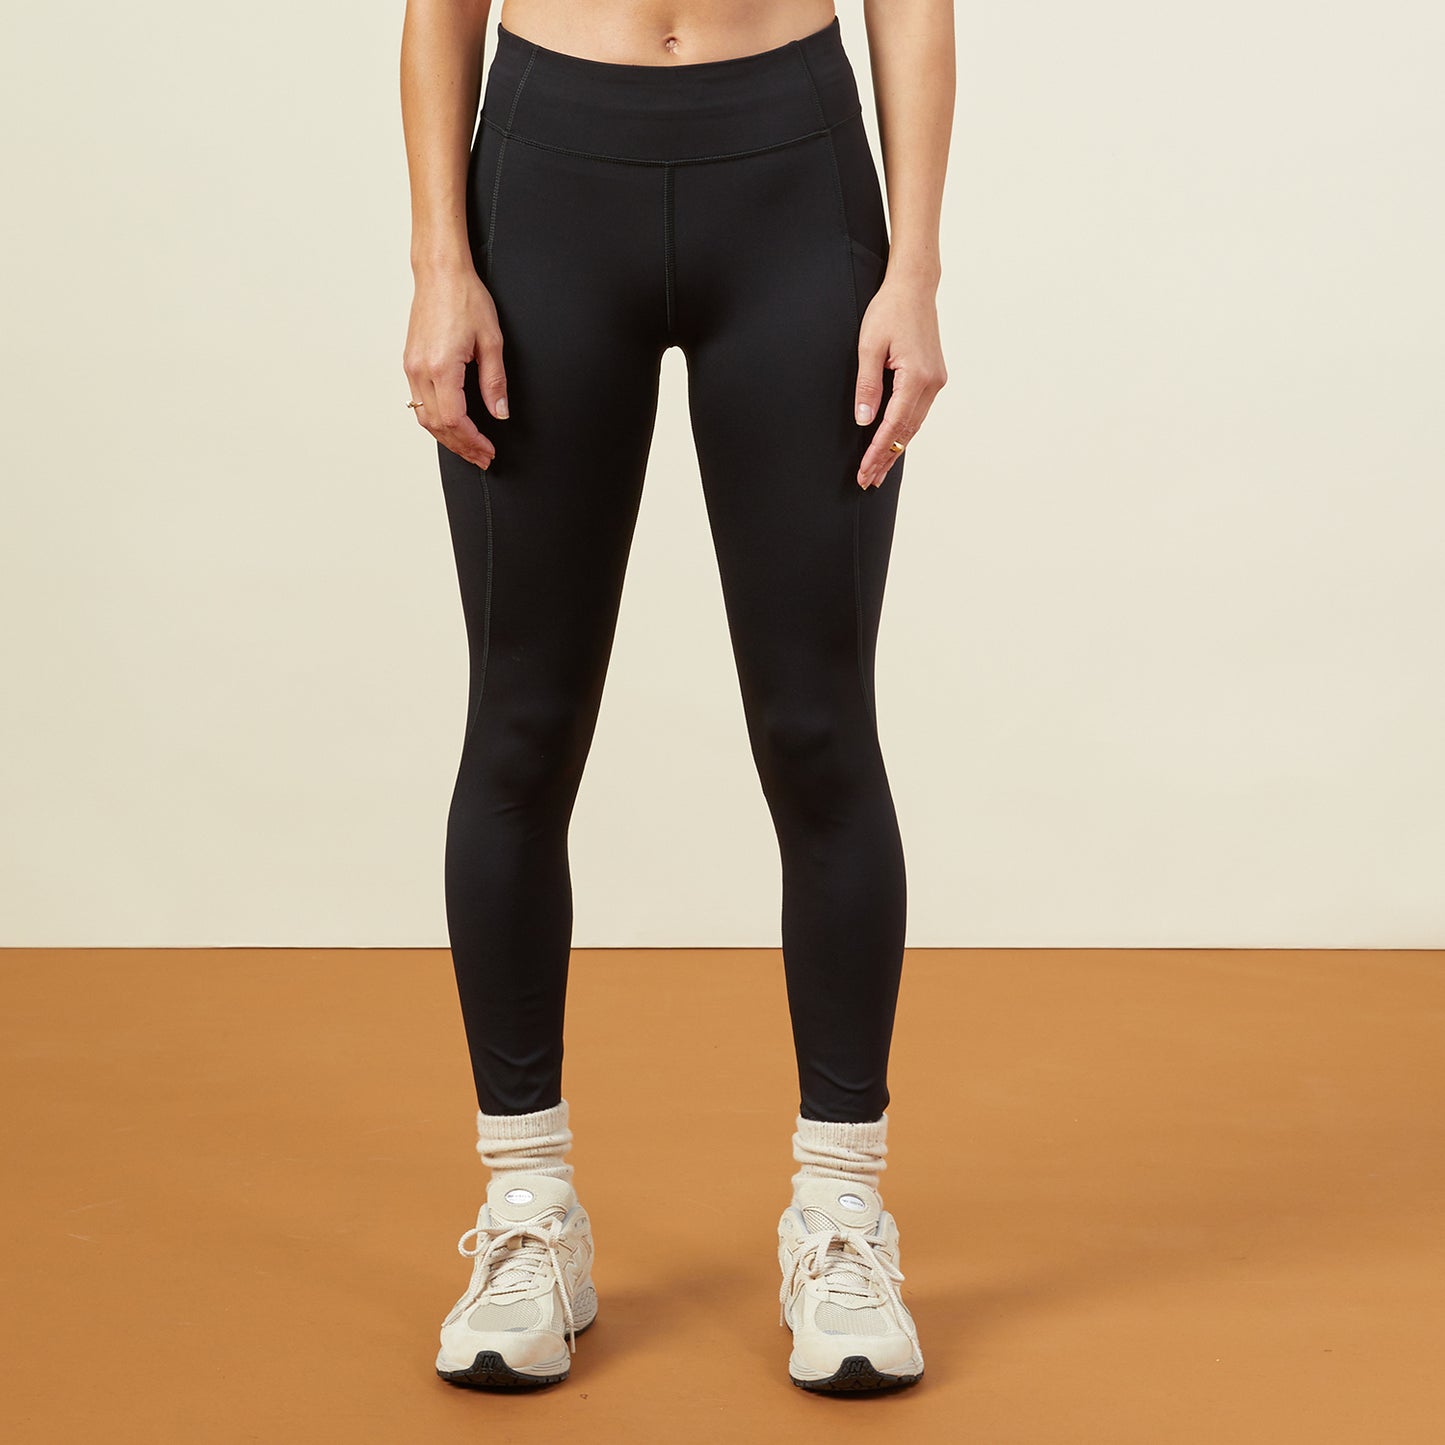 Front view of model wearing the movement high rise leggings in black.